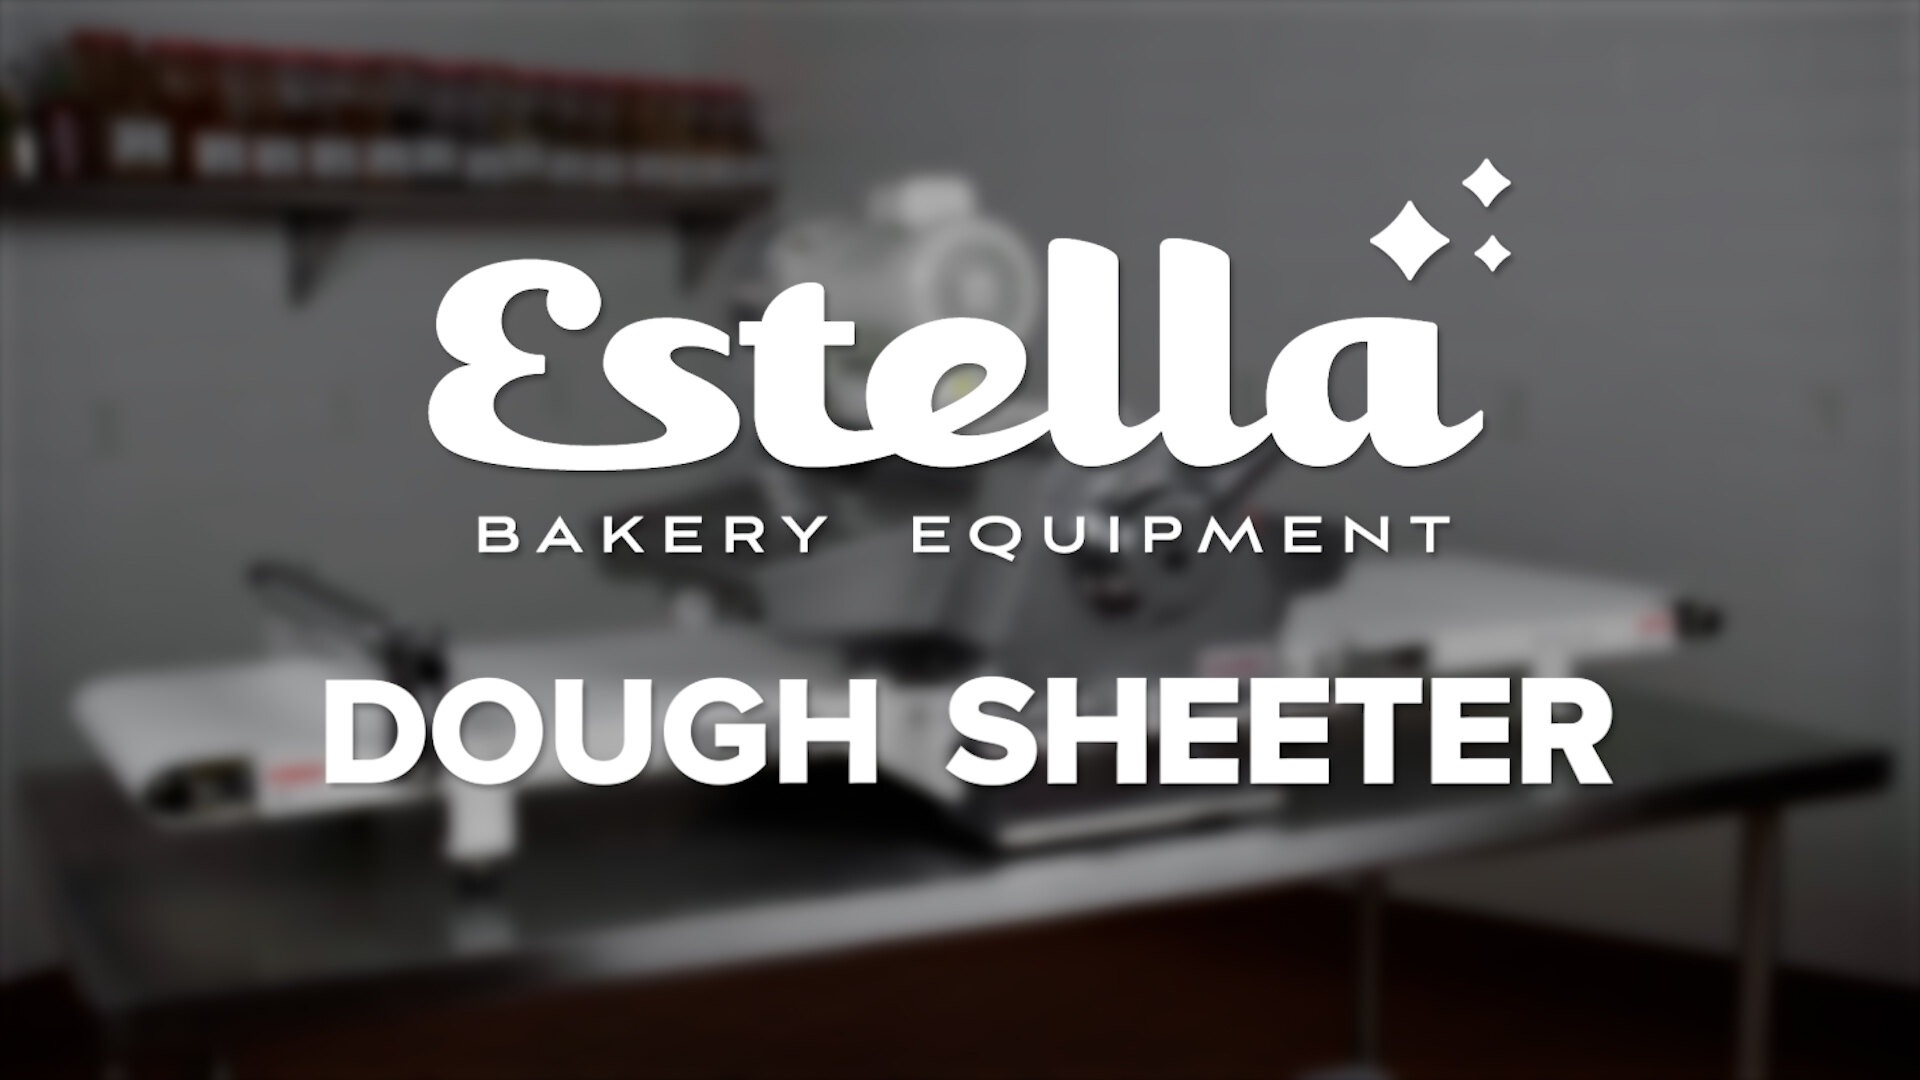 Estella EDS18S 18 Countertop One Stage Dough Sheeter - 120V, 1/2 HP